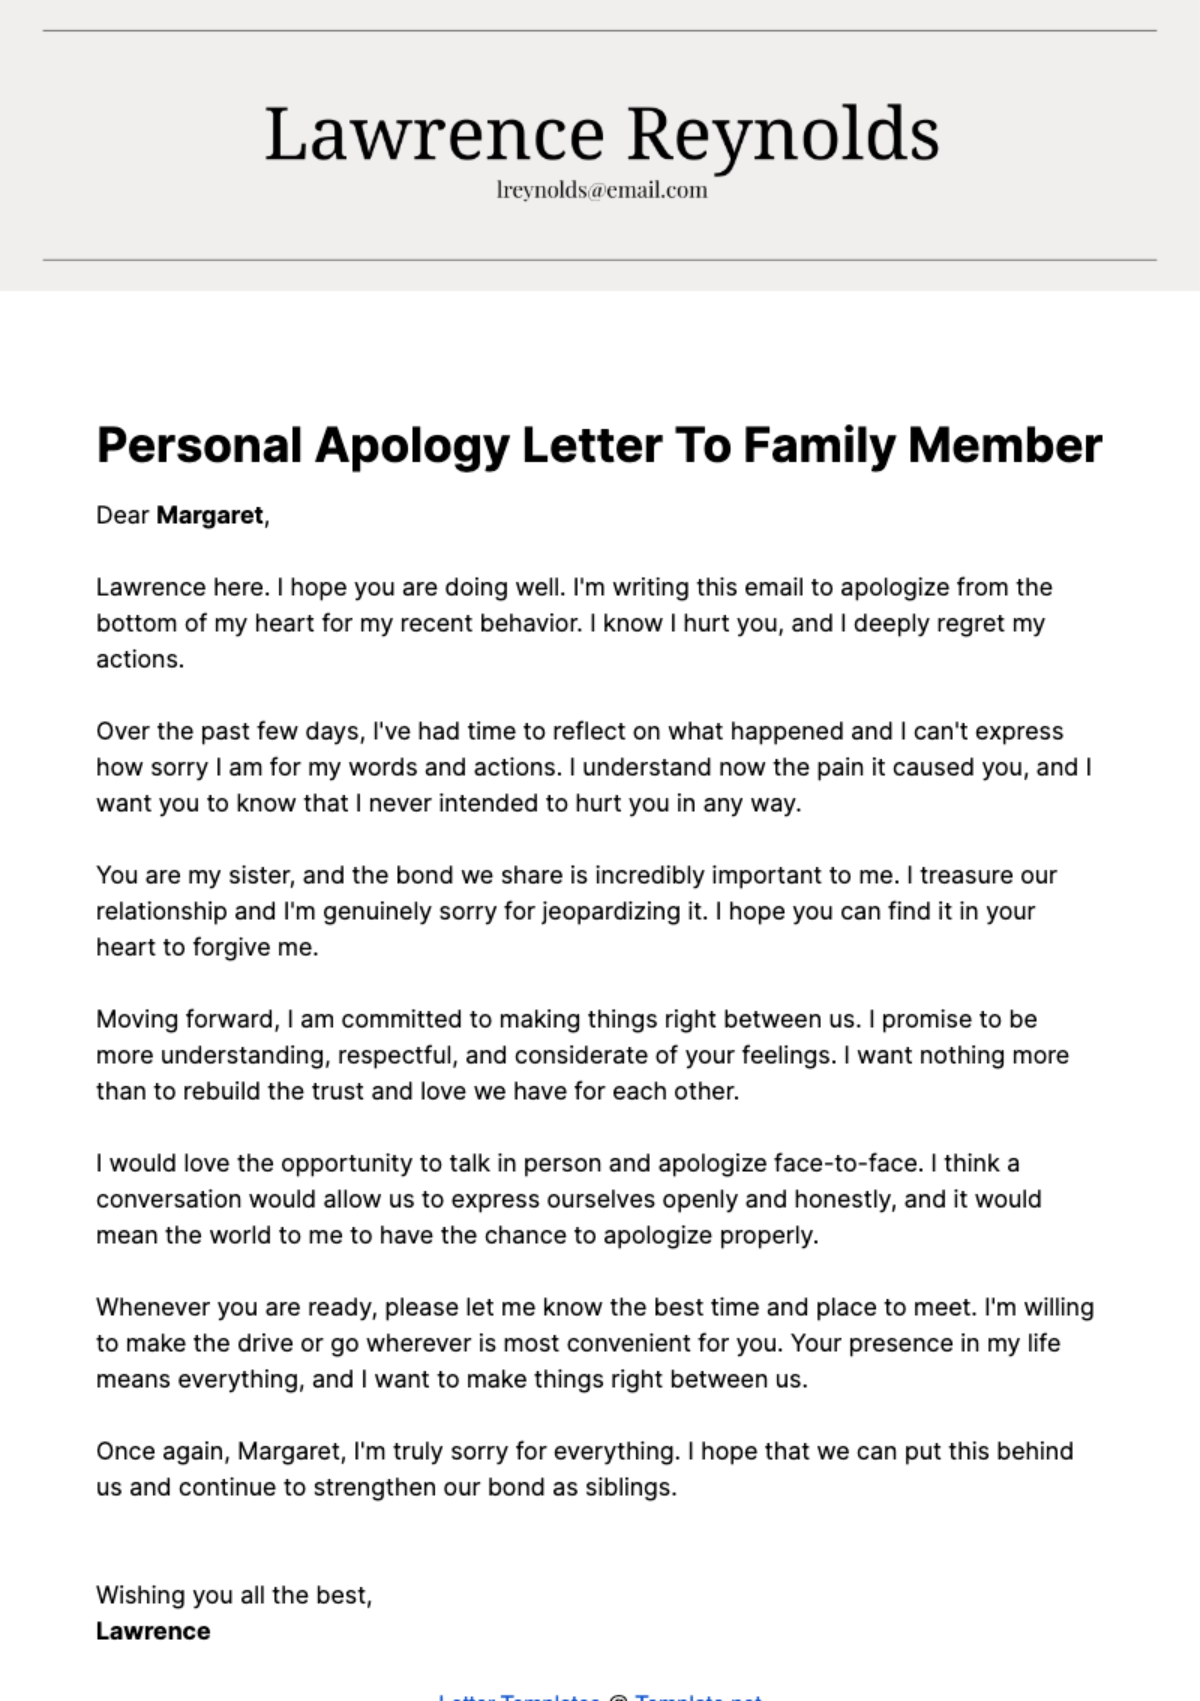 Personal Apology Letter to Family Member  Template